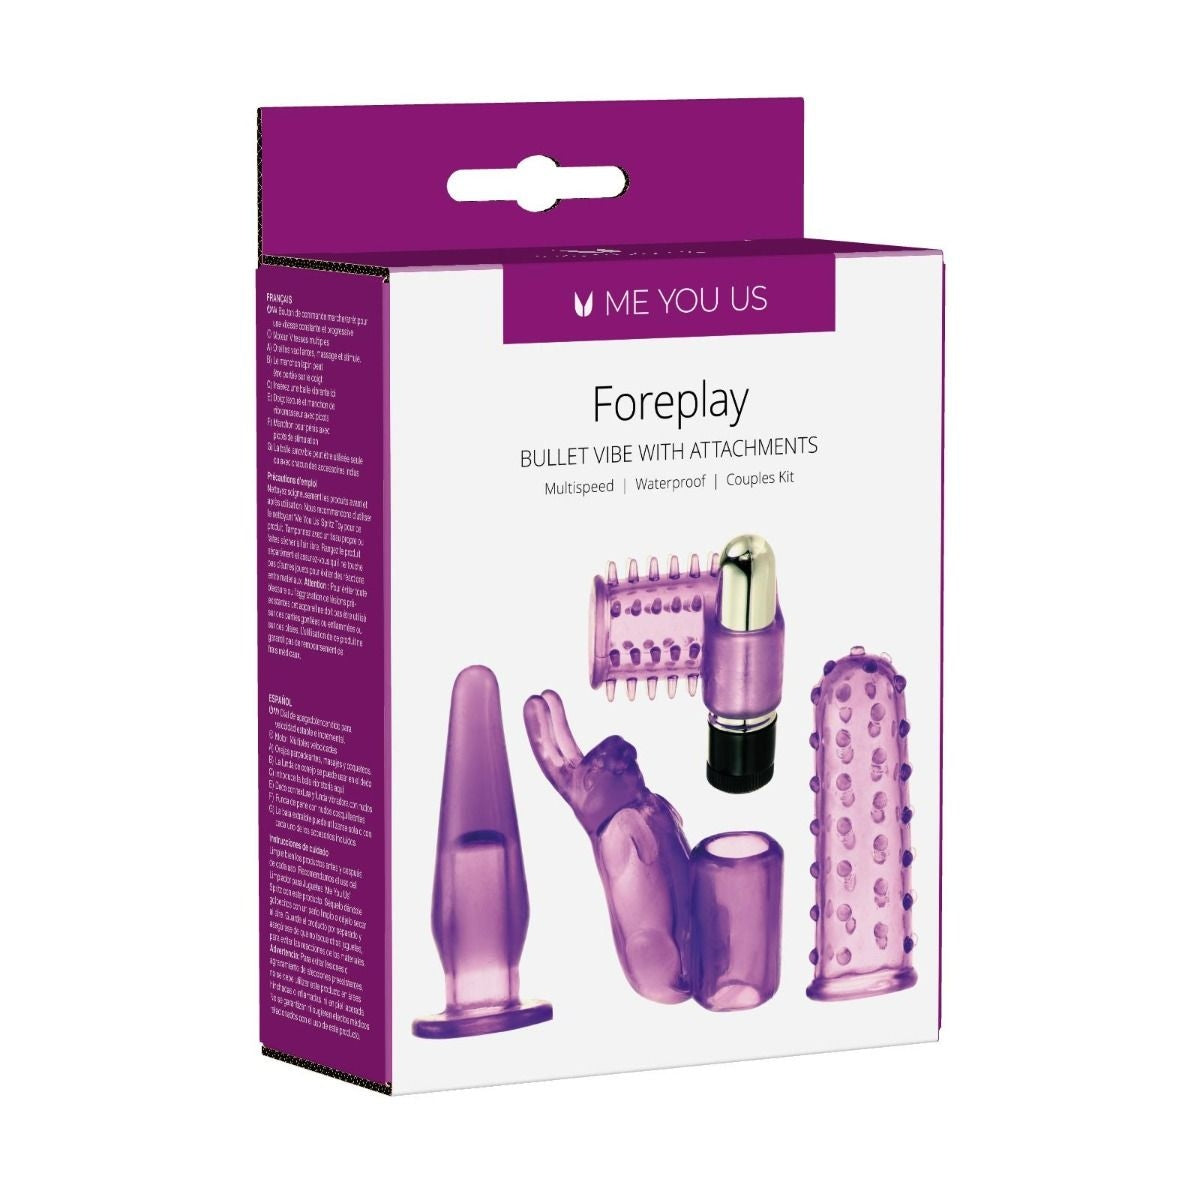 Me You Us Foreplay Bullet Vibrator With Attachments Purple - Simply Pleasure